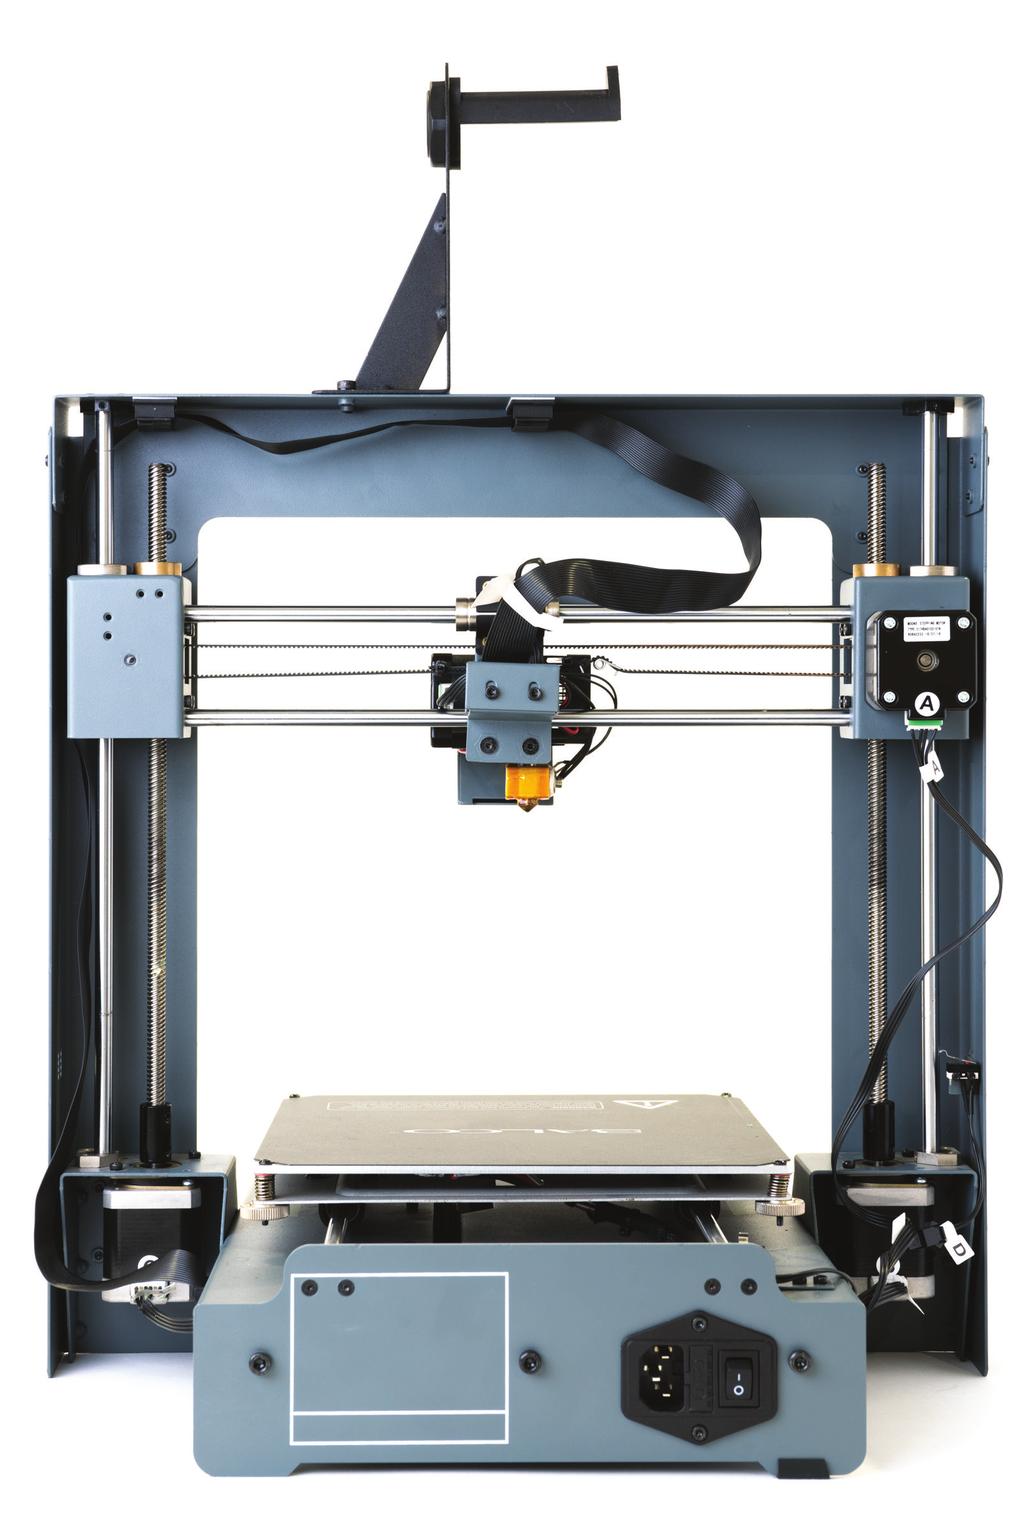 PRODUCT OVERVIEW 2.2 Printer Rear View 1 2 3 4 5 6 7 1. X Cable Track 2. X Axis Stepper Motor 3.